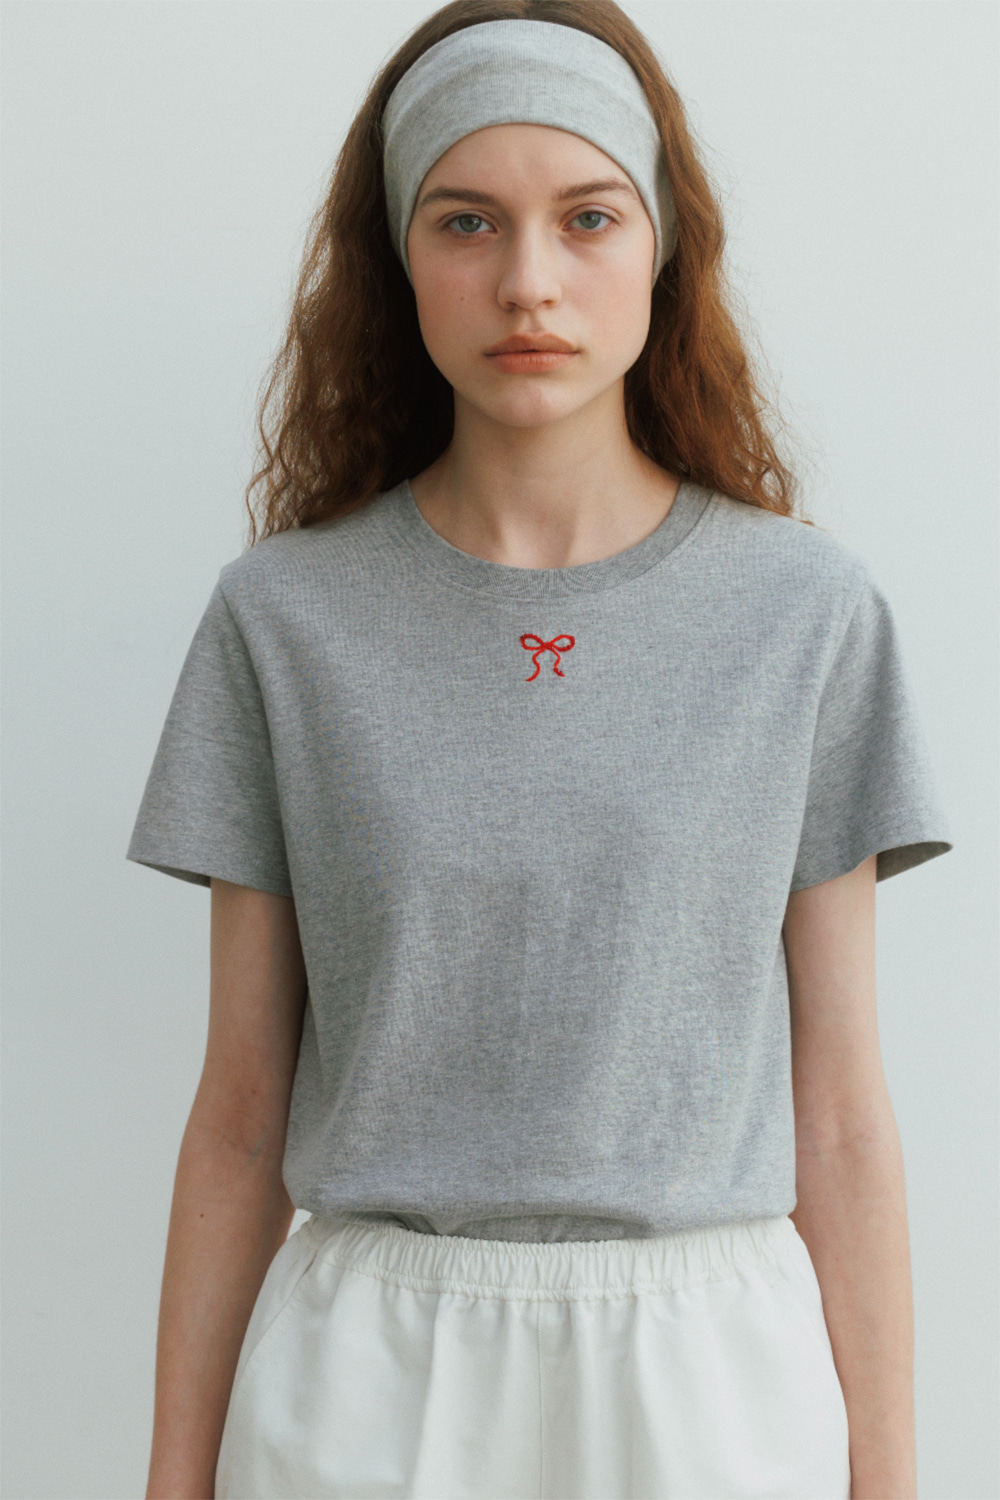 [REORDER] Embroidery Beads Tee in Grey